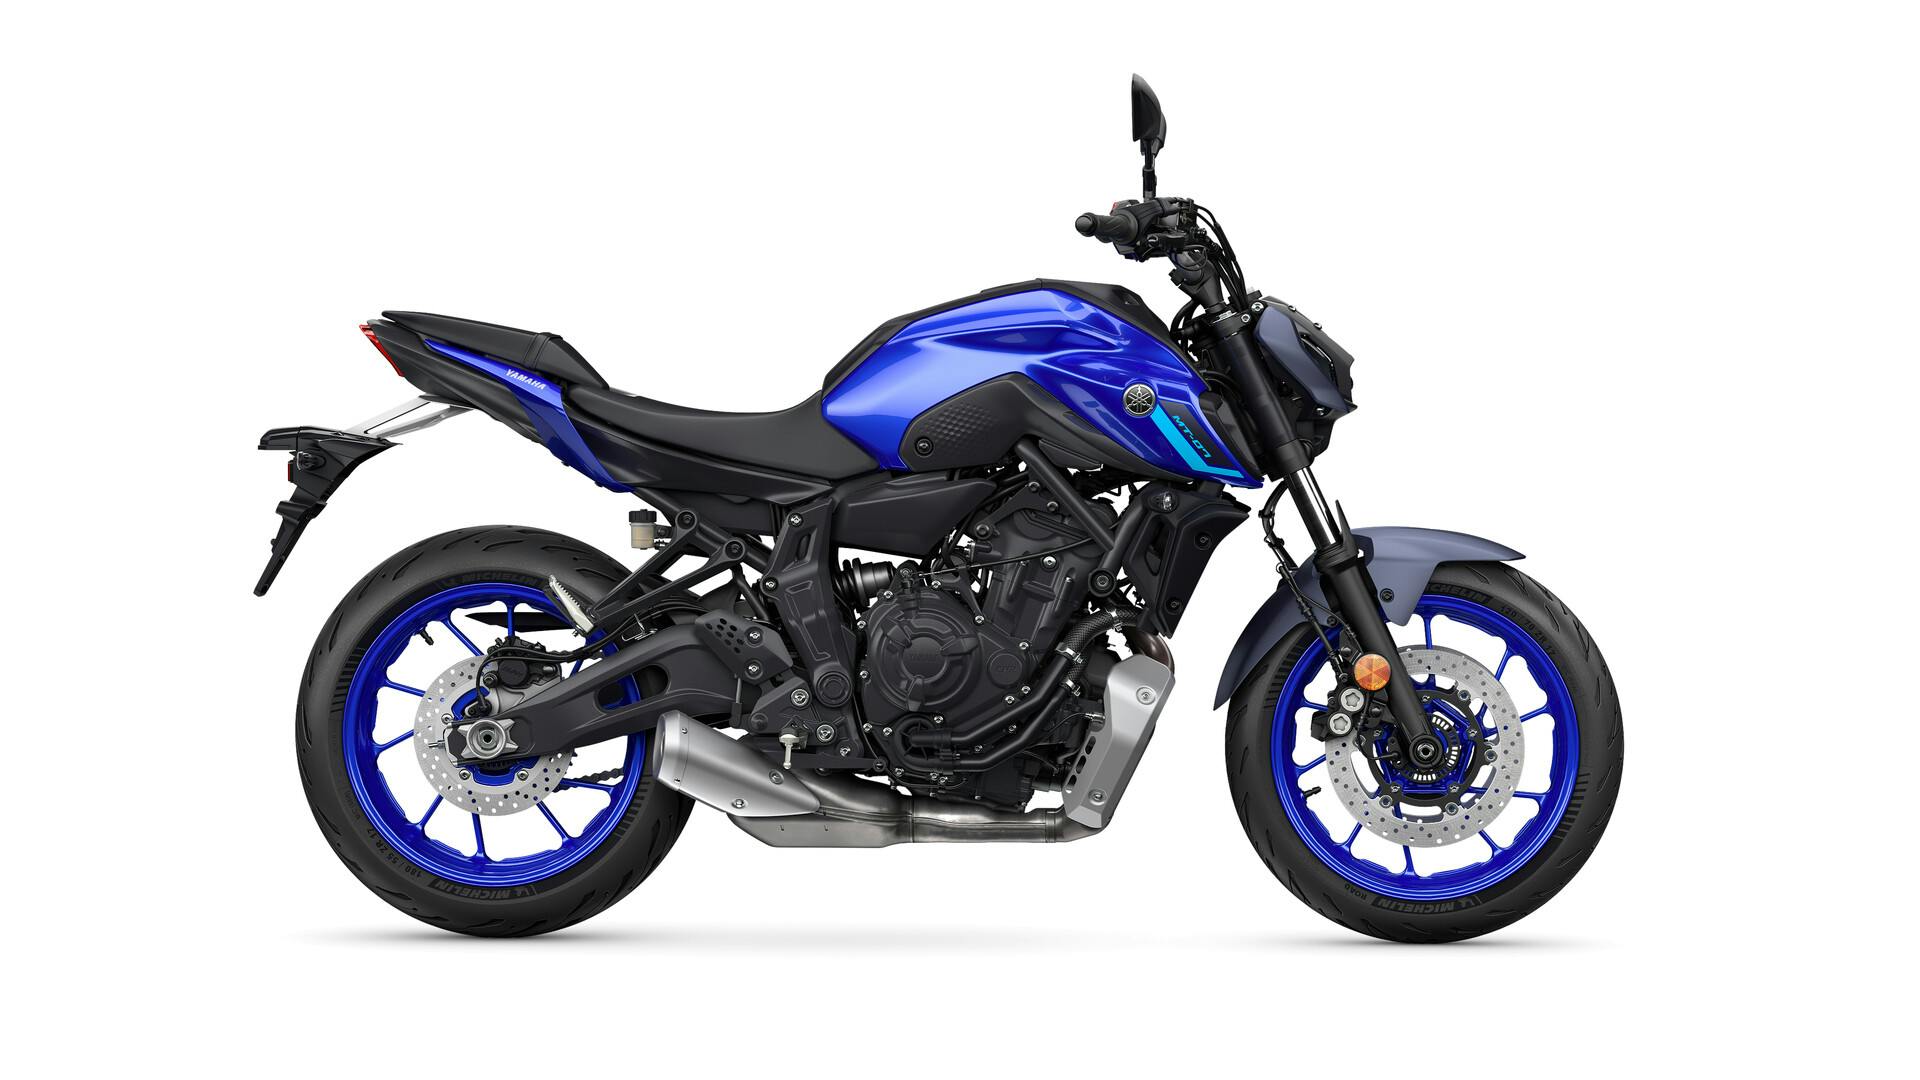 Yamaha MT-07HO in icon blue colour